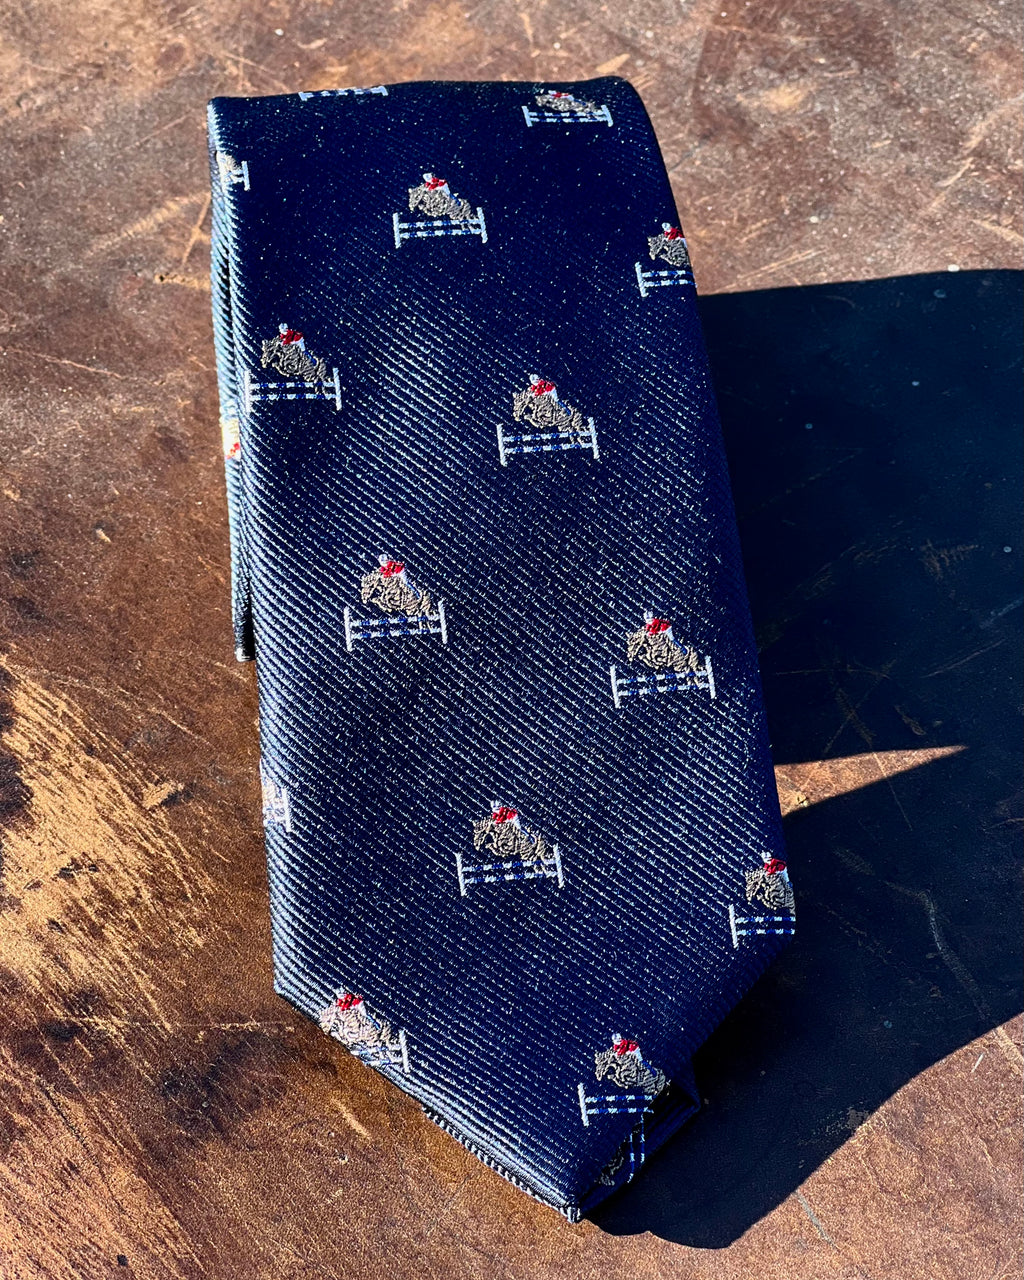 Pure silk tie featuring show jumping motif